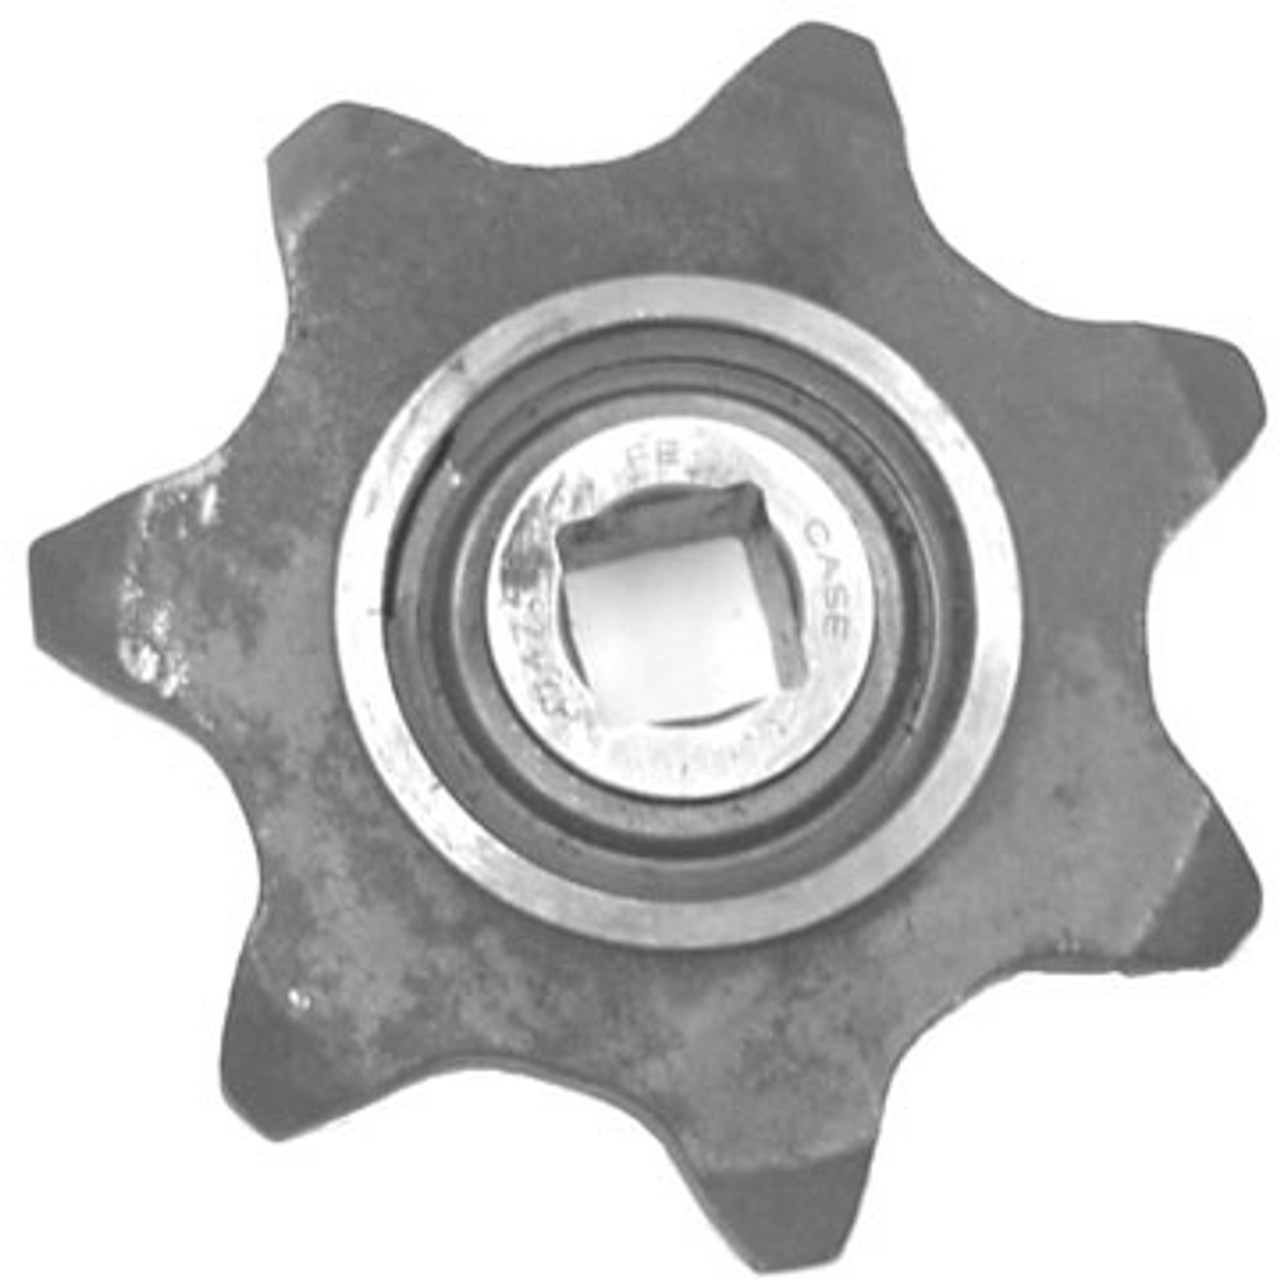 CA531251 7 Tooth Boom End Idler Sprocket Assembly--Includes Bearing and Snap Ring